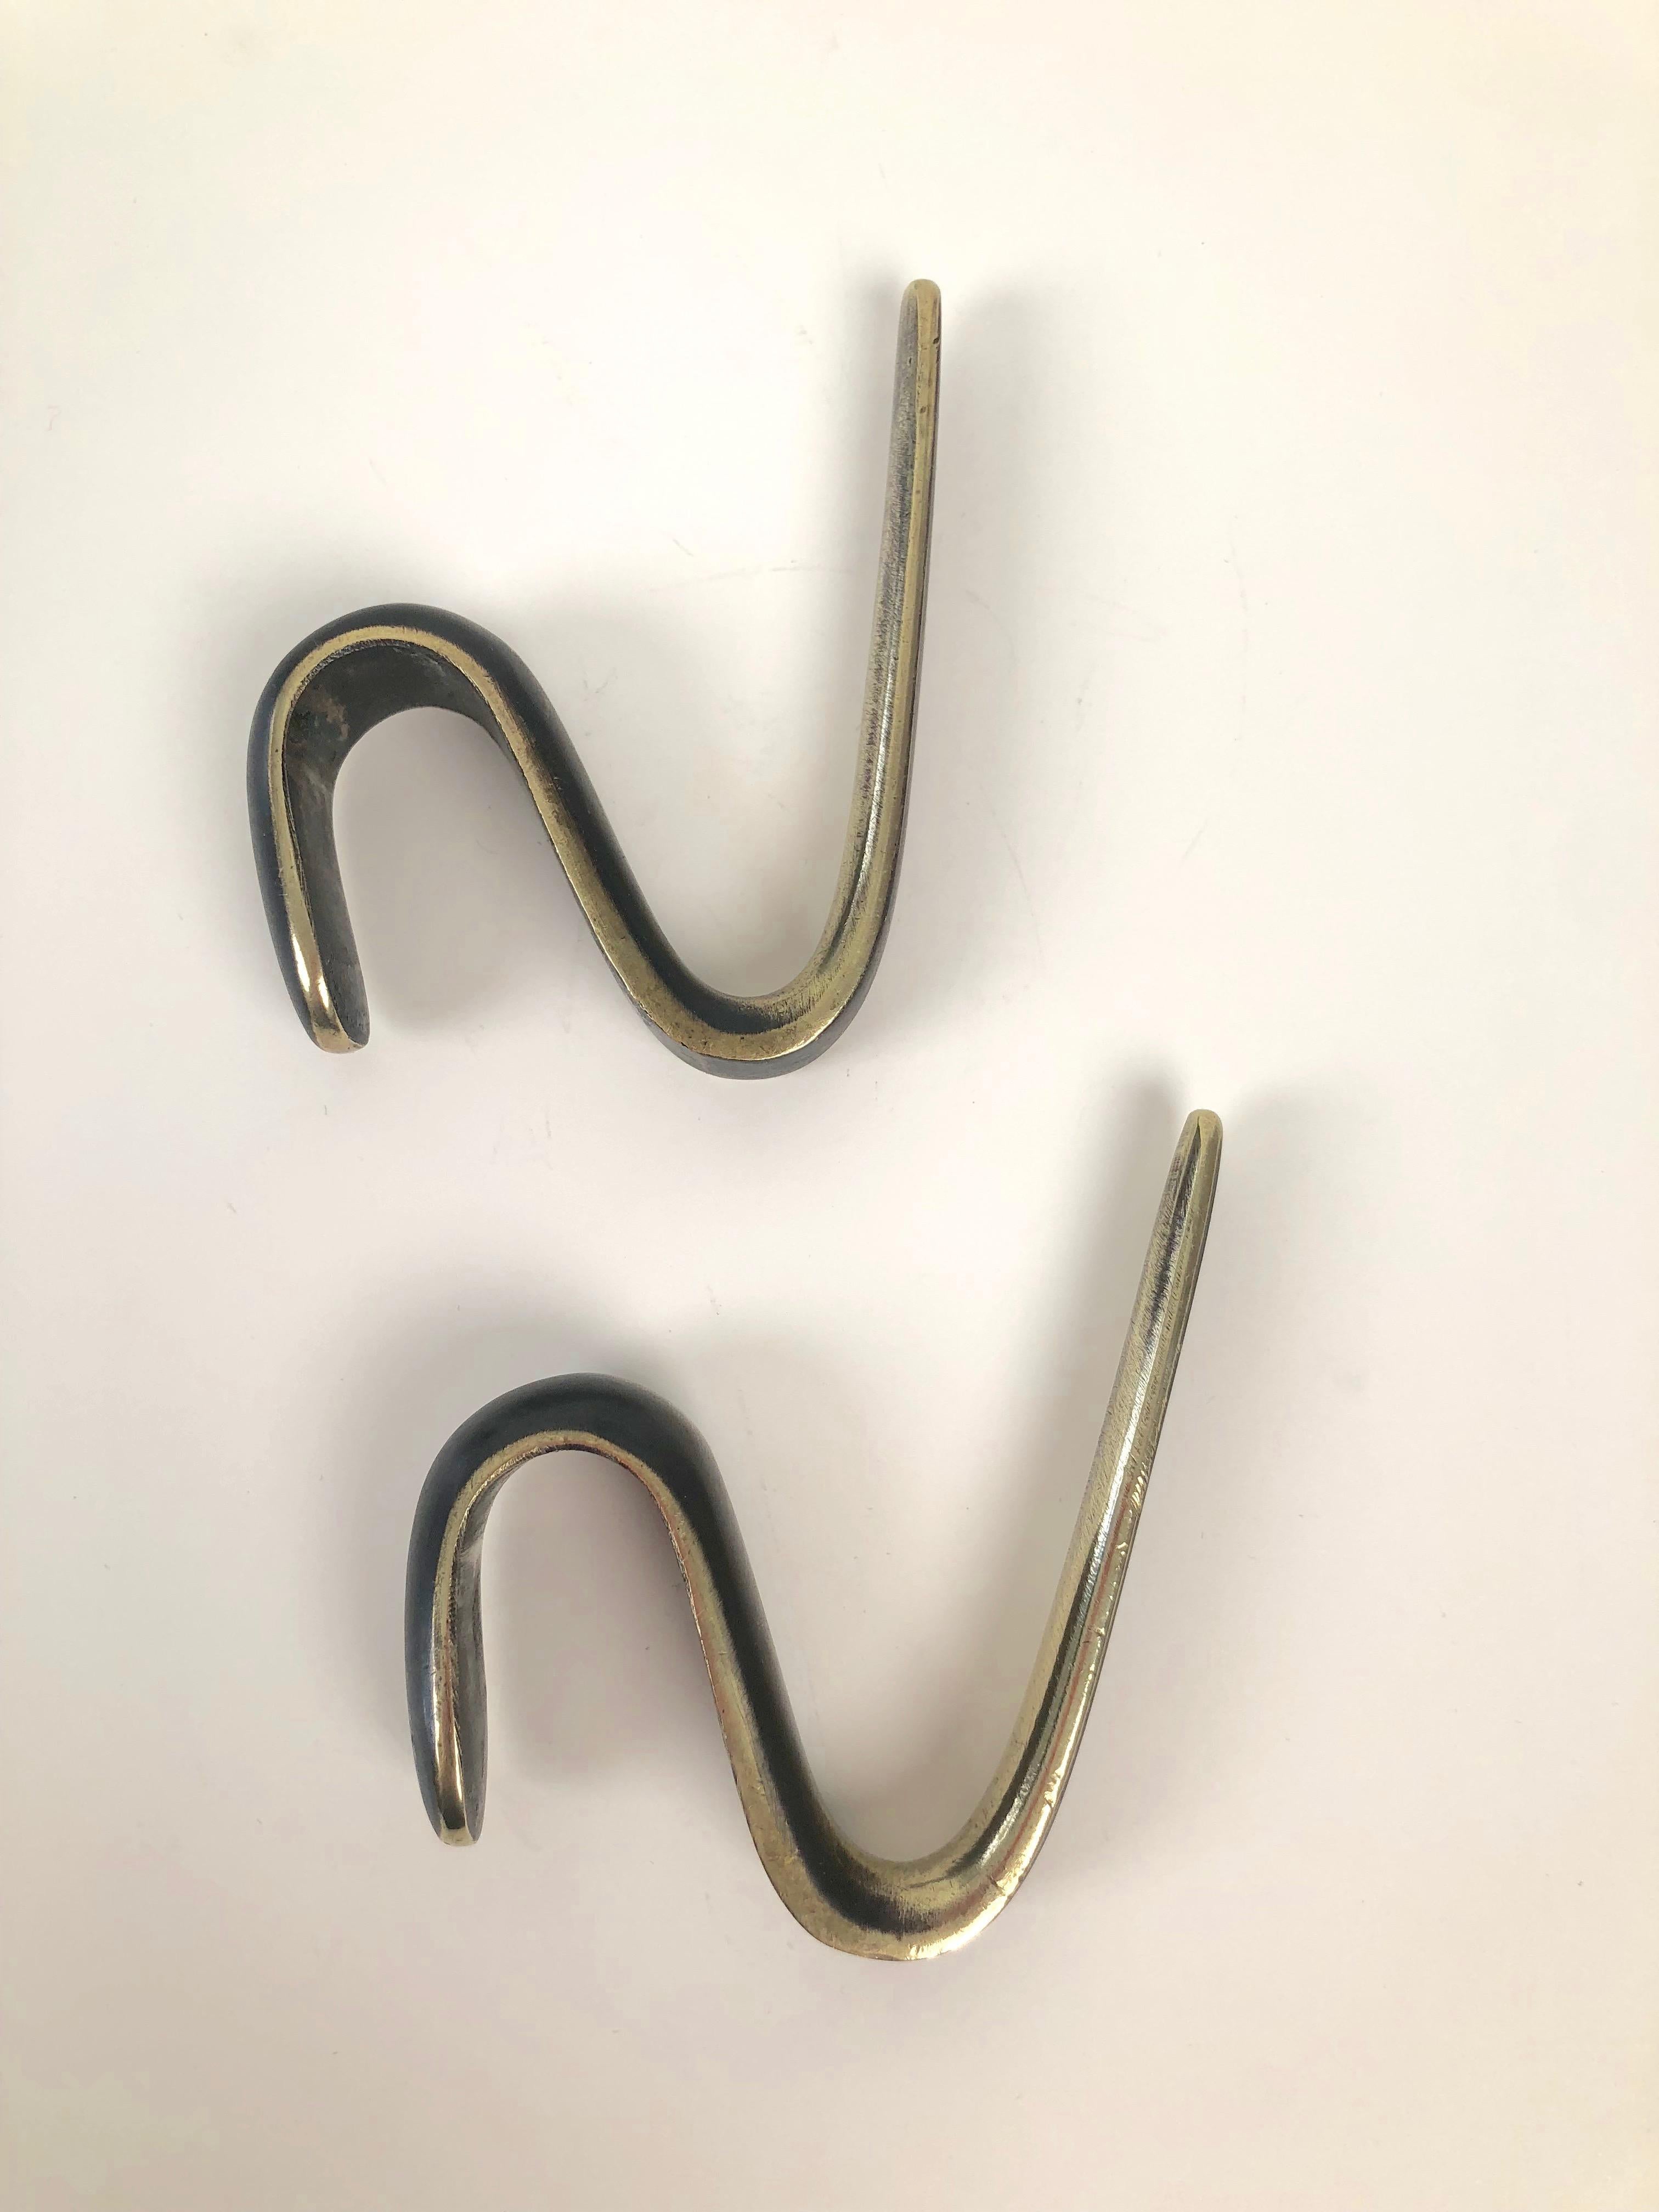 Two midcentury coat hooks in brass and black. Designed in the 1950s by Carl Auböck and manufactured in Austria, they have acquired a lovely patina from years of use.